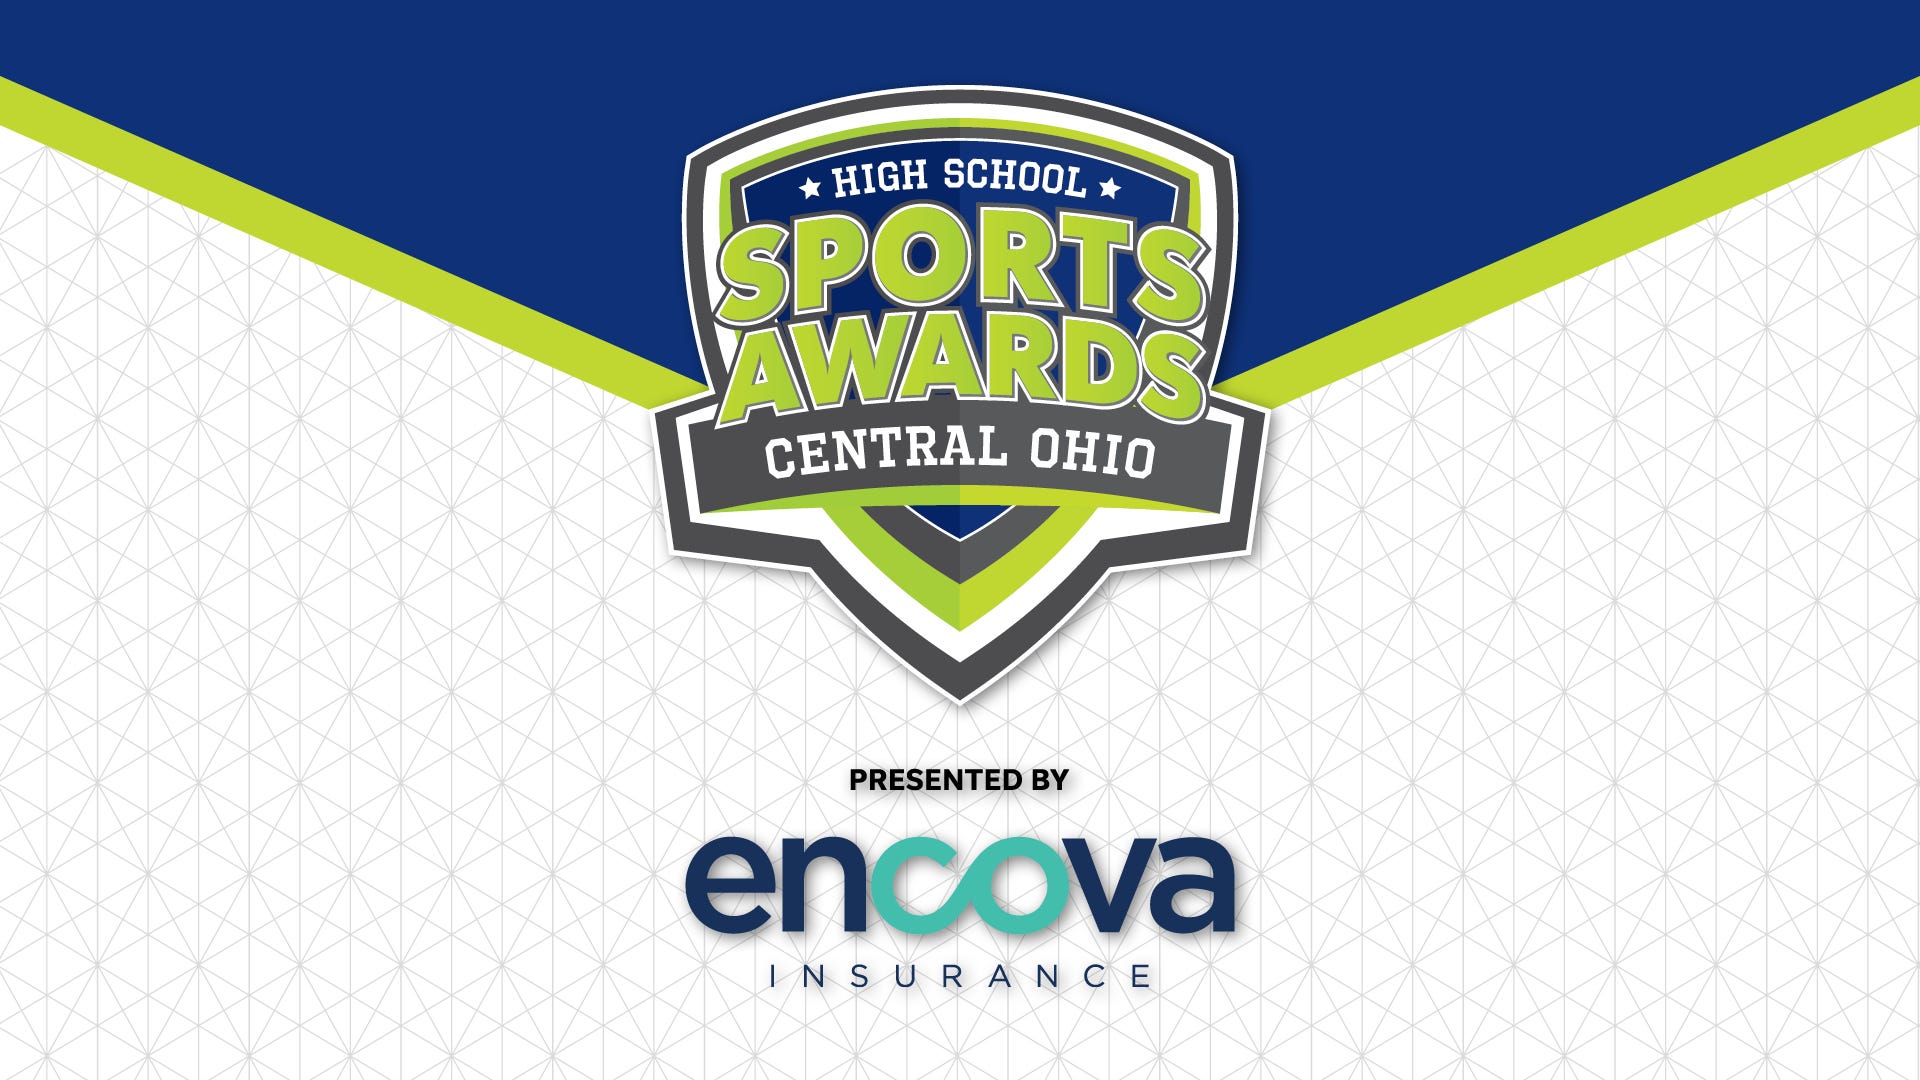 Central Ohio High School Sports Awards: Vote to win $1,000 for your school's athletic program